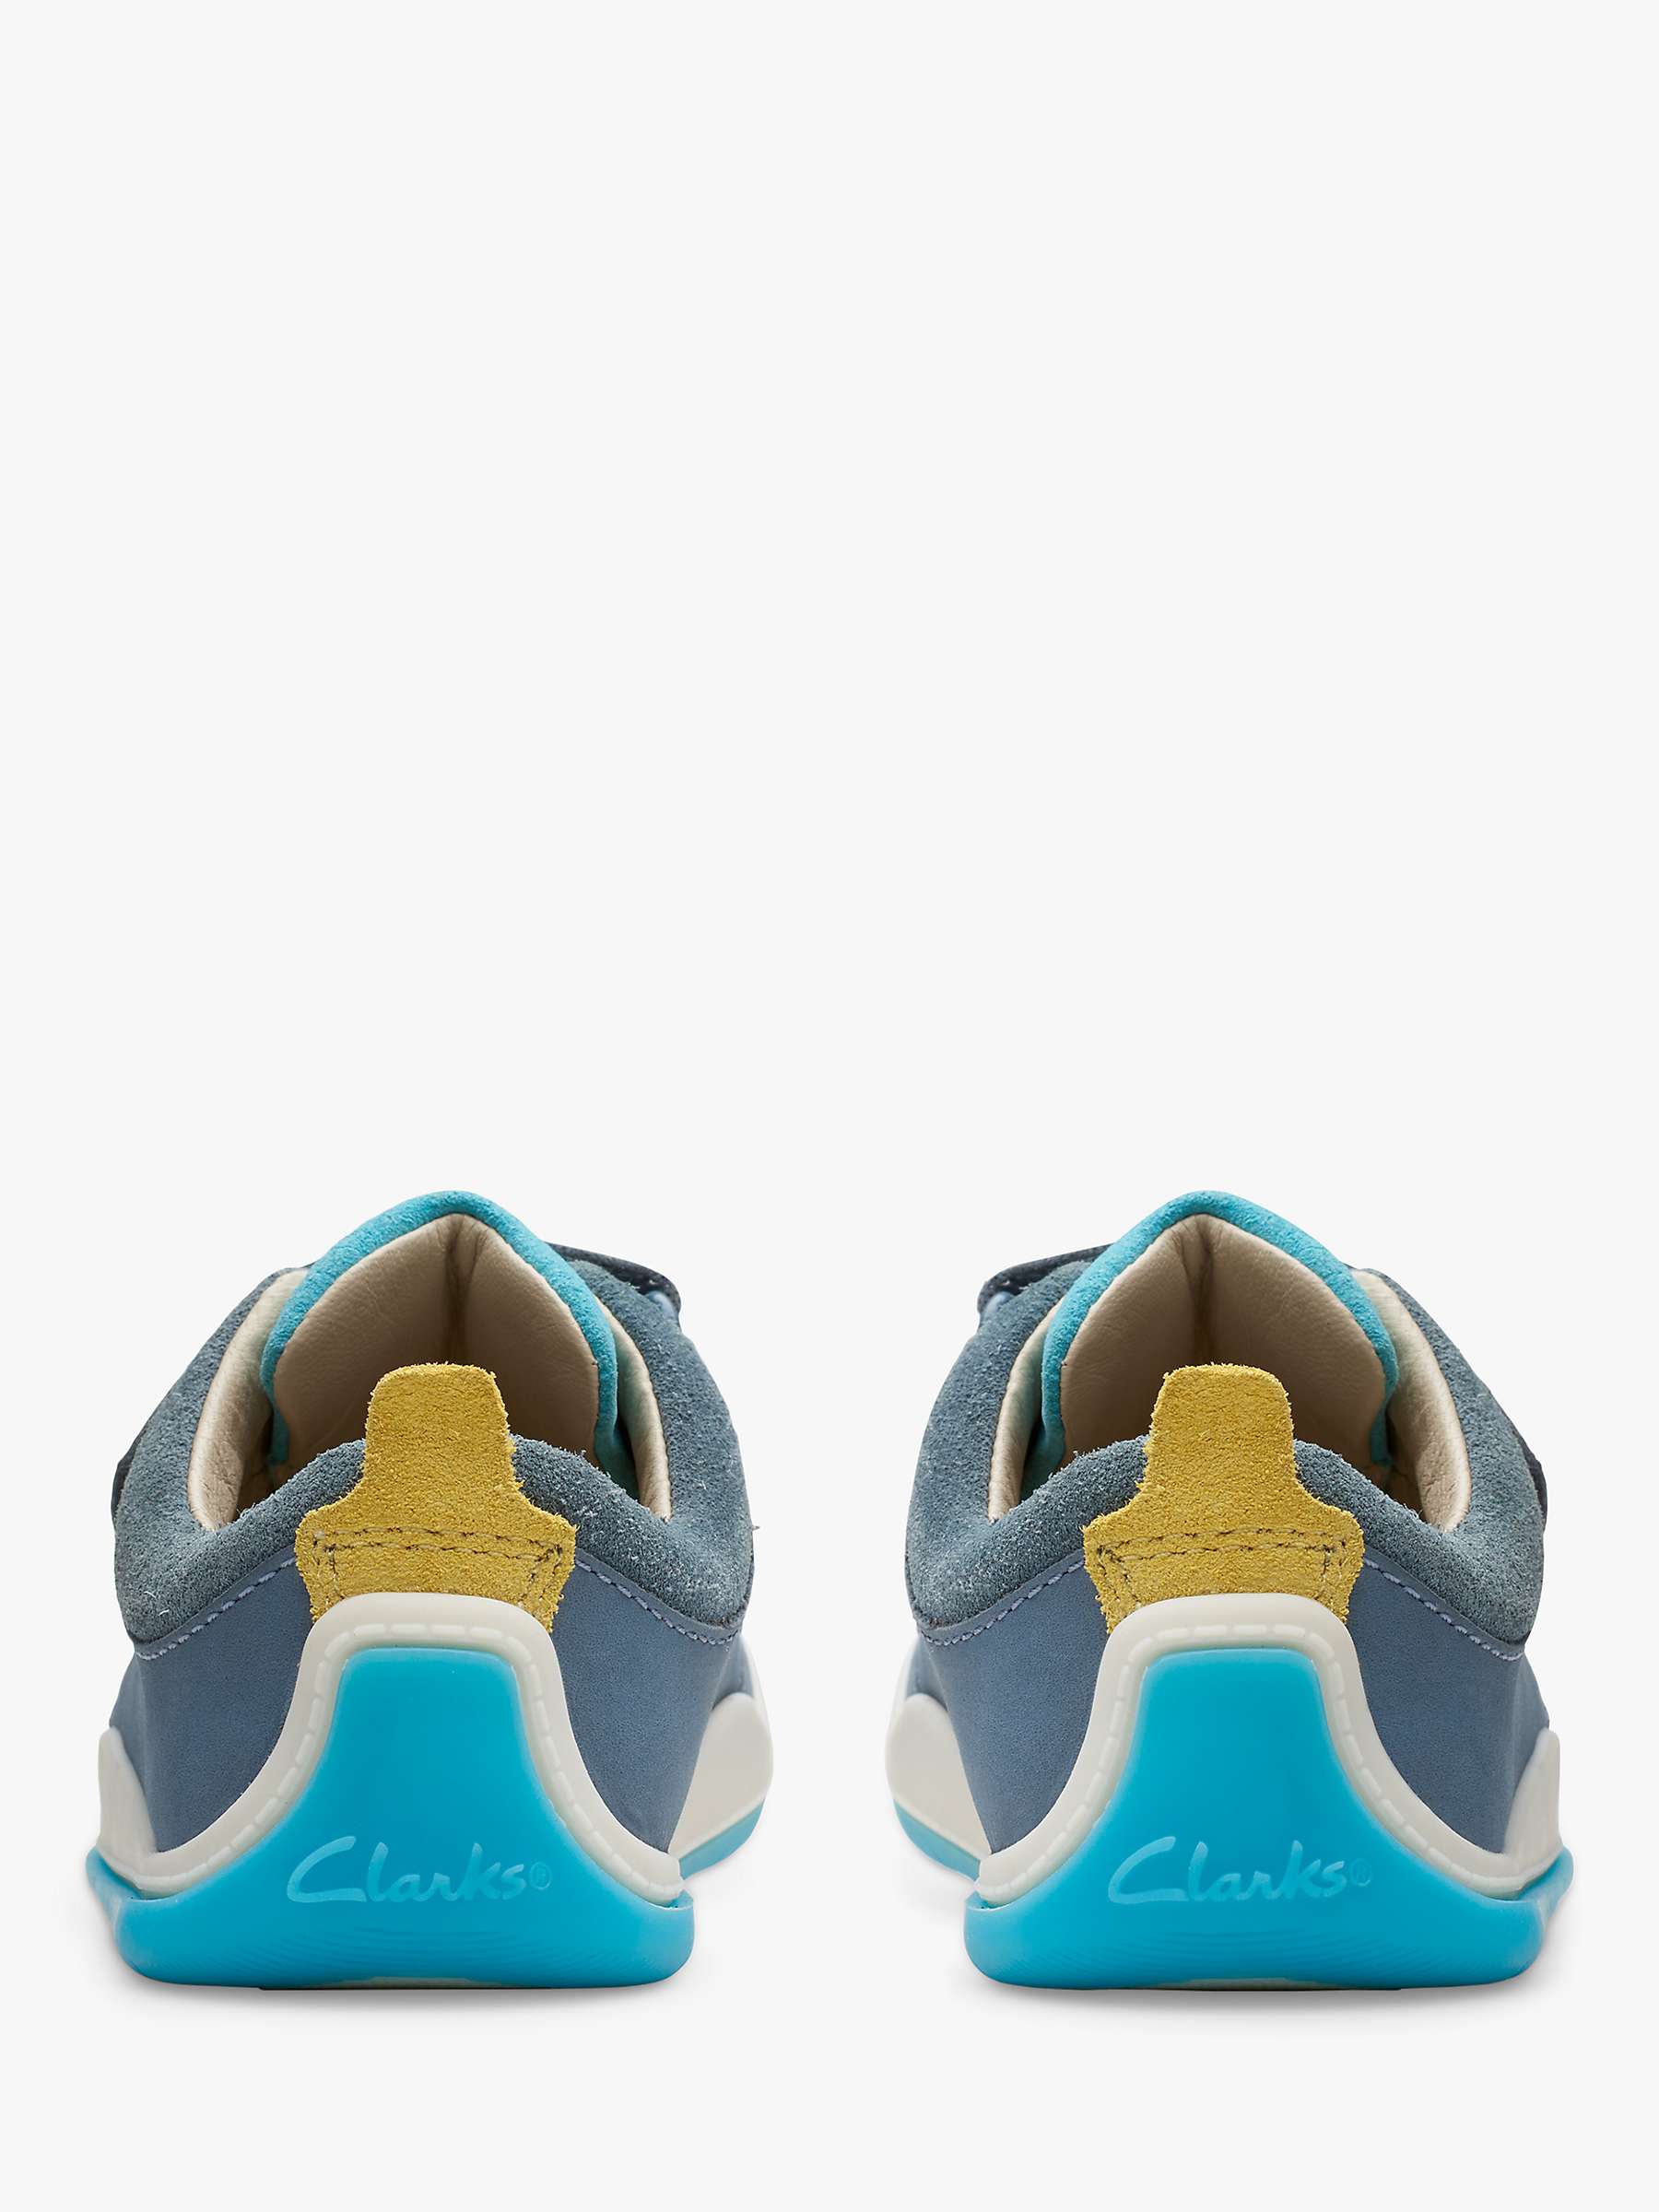 Buy Clarks Kids' Noodle Fun First Trainers, Steel Blue Online at johnlewis.com